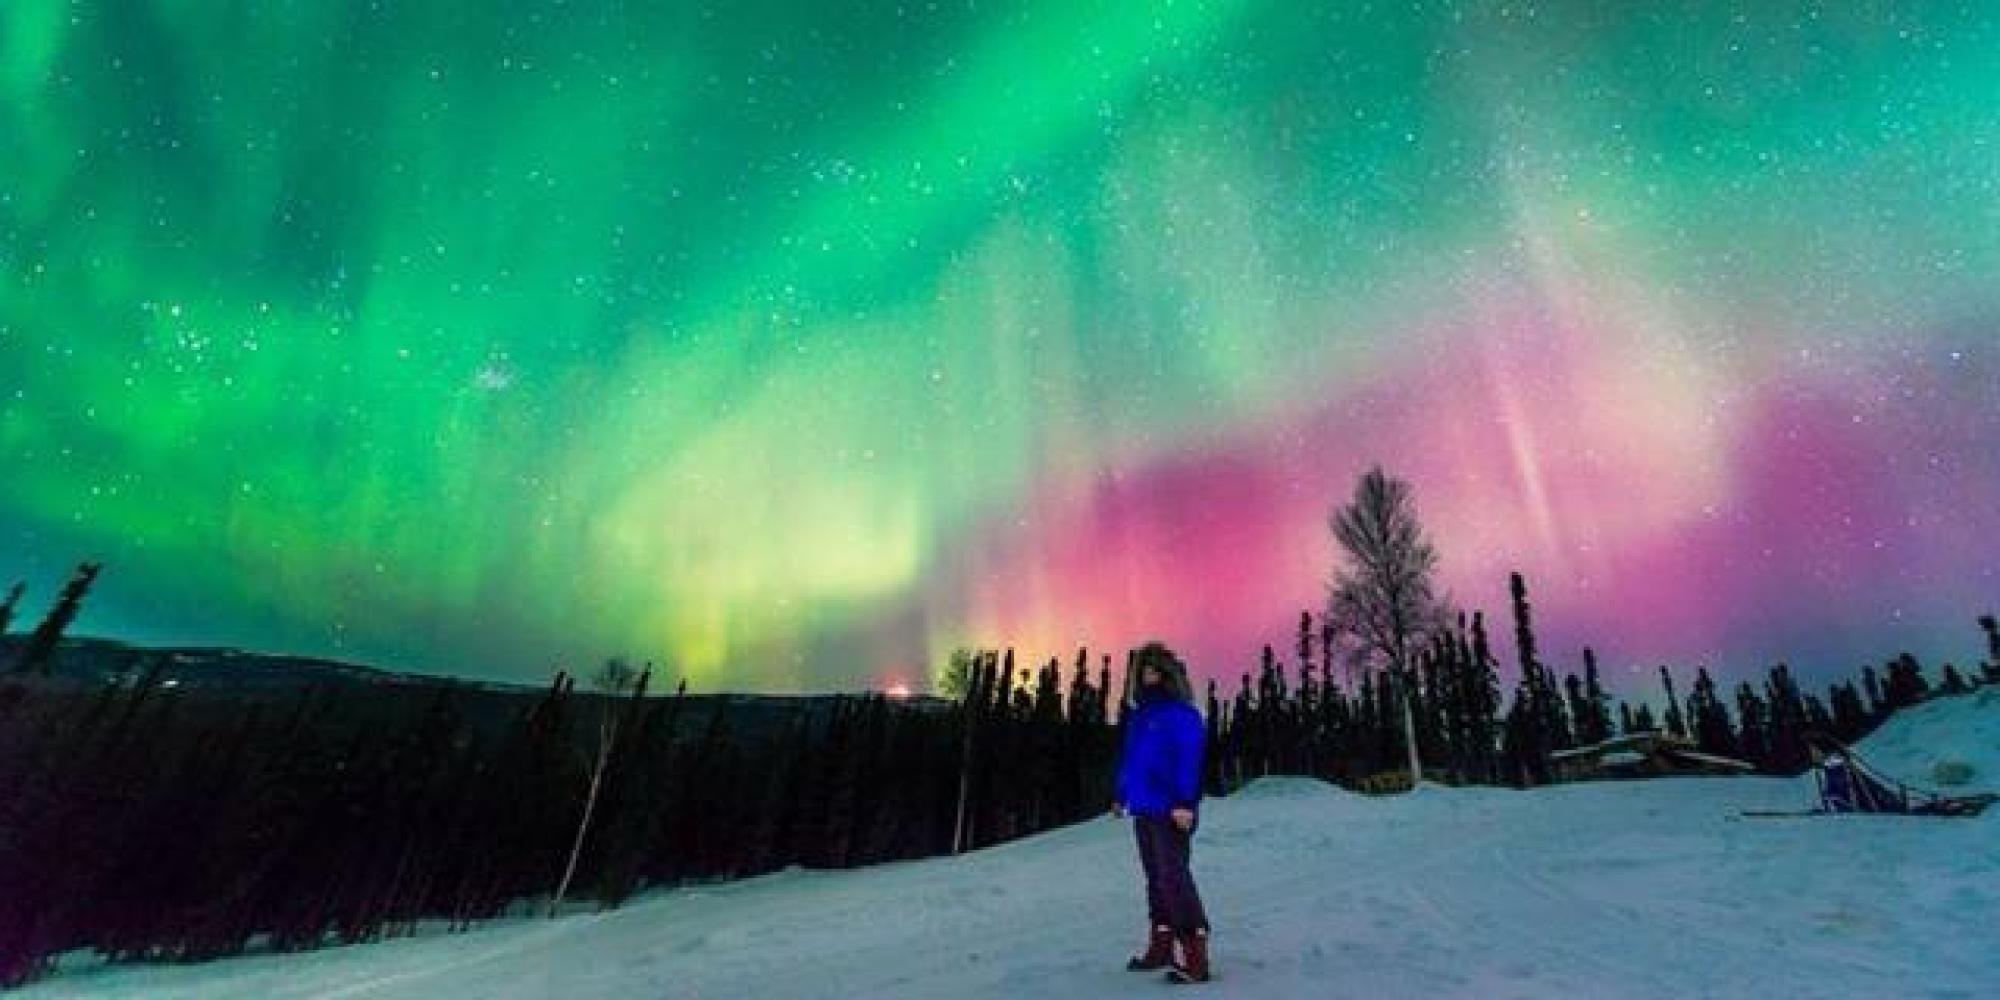 This Dreamy Time Lapse Video Is A Great Way To See The Northern Lights